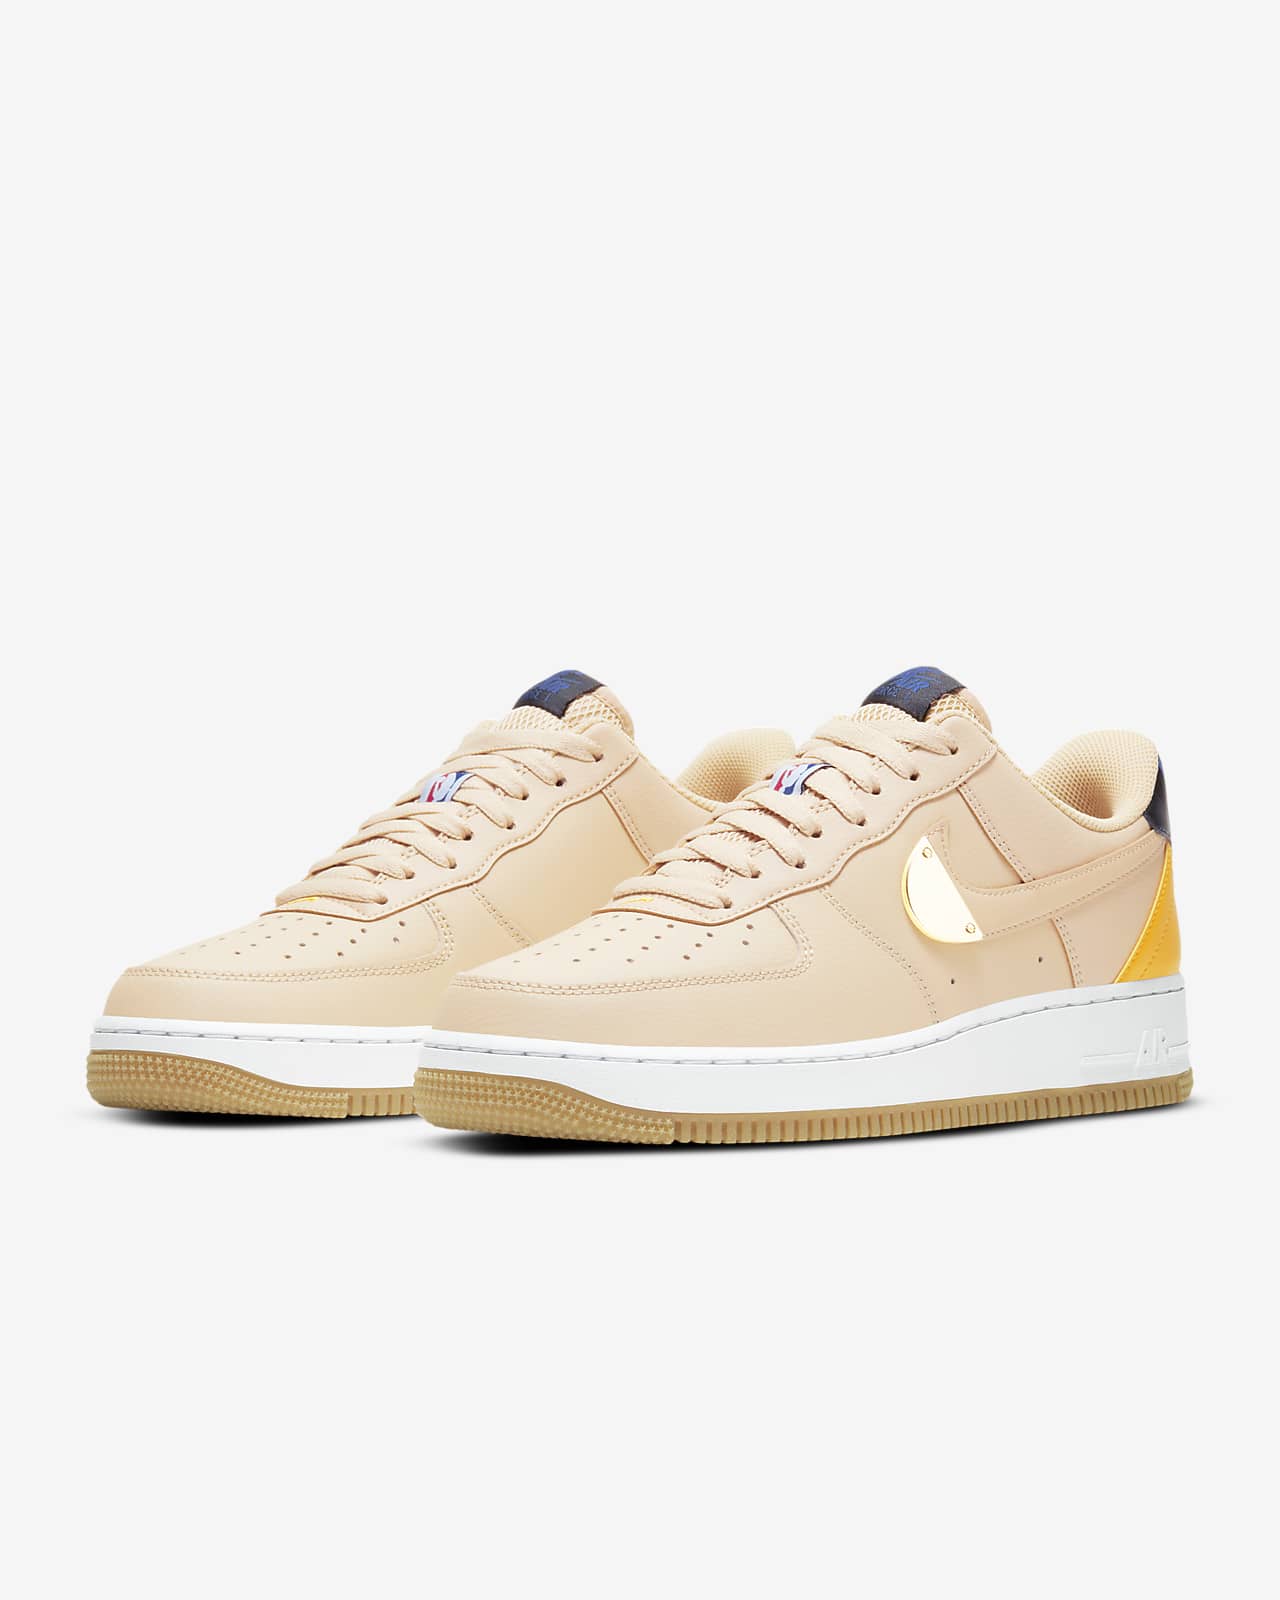 nike air force 1 low 07 lv8 blue